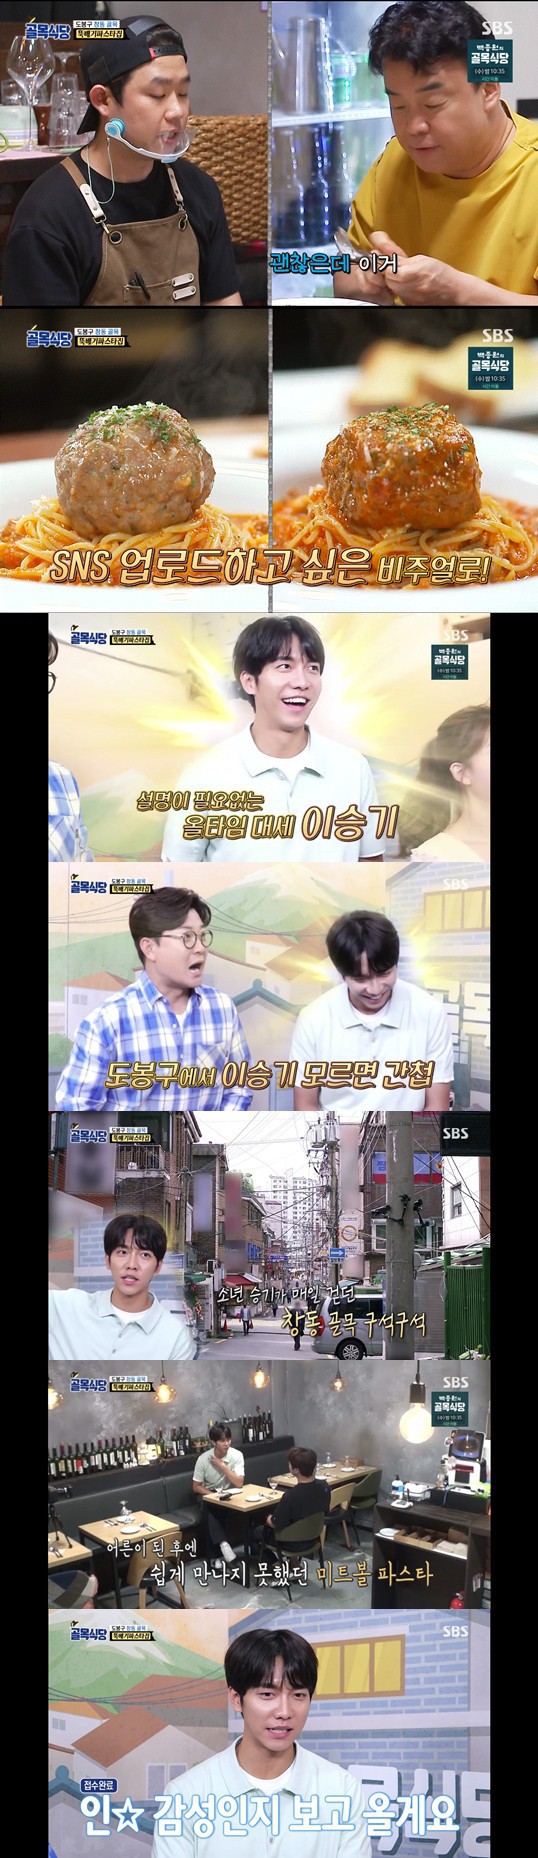 Lee Seung-gi, a Chang-dong native, praised the taste at the Pasta house in Chang-dong alley in Dobong District. On the 19th, SBS Baek Jong-wons alley restaurant was released with Lee Seung-gi from Dobong District.Baek Jong-won talked about two brilliant bosses, who said, I did not know how to talk to young friends because of my personality.If you only have a taste of chicken, its a really good house, he said.In order to objectively evaluate, Jung In-sun, a village killer, dispatched to the chicken gangjeong house.Jung In-sun asked, How did the garlic soy sauce you talked about last week change?We bought whole garlic from frozen garlic and used it directly, he said. We replaced it with general soy sauce in plum soy sauce and added flavor.Jung In-sun said he would try it in the situation room if he made a changed chicken Gangjeong.I will prepare it as the most beautiful thing that resembles Jung In-sun, said the two presidents. I have to put rose flowers. Jung In-sun showed signs of disarming immediately.Jung In-sun, who returned to the situation room, laughed at Kim Seong-joo, saying, I do not represent the bosses but they are good people.Jung In-sun and Kim Seong-joo tasted fried and garlic soy sauce chicken Gangjeong and said the fried itself was more delicious.I would have used a tan garlic, not a tan garlic, said Baek Jong-won.The odds were high that the condition was not good because it was garlic. You really have to be scolded, Baek Jong-won said.Chang-dong NO delivery pizza boss has accumulated students level of ability by learning Valeria Fabrizi Riccio Chef.On the day of the broadcast, Valeria Fabrizi Riccio Chef visited the NO delivery pizza house and offered a solution. He advised, We should remove the tomatoes shell and grind them more finely.They showed a cheerful tikitaka, a love of pizza that had broken down the language barriers.Kim Seong-joo admired the song, saying: It fits well with Valeria Fabrizi Riccio Chef, Shelf is so caring.But Valeria Fabrizi Riccio Chef saw the tuna in the plastic container and told him to move it to the Baro stainless steel container now.Move quickly before Mr. Baek Jong-won sees it, he said. I say no to Baro, acknowledged Baek Jong-won, who watched it.He also praised the boss after seeing the lid on mozzarella cheese, who responded to Chef as my great teacher.Valeria Fabrizi Riccio Chef said as a gift on the day, she will give you a new pizza that is as unique as tuna pizza and can not be tasted elsewhere.The boss is a school of study abroad at this point, said Kim Seong-joo, who said Valeria Fabrizi Riccio would tell me about Italys southern style pizza.Peperoni is the American name and in Italy, the name is Salami, he explained.Valeria Fabrizi Riccio Chef described a new pizza using salami and mushrooms, red pepper oil and ricotta cheese.I saw a recipe on the Baek Jong-won teacher YouTube, he told the boss.The two tasted the finished Salami ricotta cheese pizza with Baek Jong-won; Baek Jong-won responded delicious and the boss also said to the crew, Im looking forward to it.Its really delicious, he said.The boss presented Baek Jong-won with arancini Cream Pasta and meatball tomato Pasta; Baek Jong-won tasted the arancini and commented that it was delicious.This is fine, definitely with Cream, he said after tasting CreamPasta noodles.Baek Jong-won went on to taste the tomato sauce and said, Its smooth, and I also took a bite of meatballs and said, Its definitely delicious.The nervous boss laughed for the first time.Do you like the meatball pasta now? Baek Jong-won asked the boss, Do you think this is the completion when the boss thinks?The boss said, No, after agonizing.What I see is just a tomato pasta feeling, the boss said. Baek Jong-won said, Its not finished yet.He then advised me to study the shape of the meatballs. I used to play with taste, but now I have to be uploaded to SNS.Now the boss is not far from me - its over if he knows what to do with meatballs, said Baek Jong-won.I will send you a guest, so show your guest some arancini and some meatballs, he said.I was a hard-to-reacher, and I was here because I came from this neighborhood, said Baek Jong-won, whose questioning guest was Baro Lee Seung-gi.Chang-dong native Lee Seung-gi appeared, greeting him I wanted to come out.Kim Seong-joo said, If you do not know Lee Seung-gi in Dobong District, you are a spy. I know that elementary and junior high schools are all near here.Lee Seung-gi has lived in Dobong District all the way through Su Yu-ri, Bang Hak-dong, and Chang-dong.After my debut, I lived in Chang-dong for about a year, Lee Seung-gi said.I admired you so much and wanted to be invited once, Lee Seung-gi said to Baek Jong-won.Lee Seung-gi had two places to visit: a Ttukbaegi Pasta house and a NO delivery pizza house. Baek Jong-won asked him to test without adding.Lee Seung-gi expressed confidence that he would see it as a personality sensibility.Lee Seung-gi asked the boss, Did you live here long? Is Pasta okay with the menu?He also looked around the store and said, I learned from a real Italian Chef.Lee Seung-gi recalled memories by talking about school with the local Friend boss.It is good to have a Pasta house in this neighborhood, he said. In the past, family restaurants were able to eat.The boss showed a big meatball in the advice of Baek Jong-won to make the shape of the meatball different.Lee Seung-gi took a picture on her mobile phone and said, I think its Na-eun, which is more round than a square, even after tasting meatballs soon, its delicious.I think the big one is Na-eun, he said.Lee Seung-gi then admired the arancini Pasta, saying it was a taste that sauce wants to eat. He also said, Its too my style.Thats what I wanted, said Baek Jong-won, who was watching this.Lee Seung-gi continued, Im not sure what is lacking, and asked, Do you have to tell me the problem? And also said, Its just delicious.I think it would be nice to increase the amount of rice a little, he said, and ate CreamPasta and admired it as a really favorite cream Pasta taste.Lee Seung-gi also said, This is perfect, and I think students or family will really like it.Kim Seong-joo was delighted that I would have experienced a lot of good restaurants because I liked Pasta.